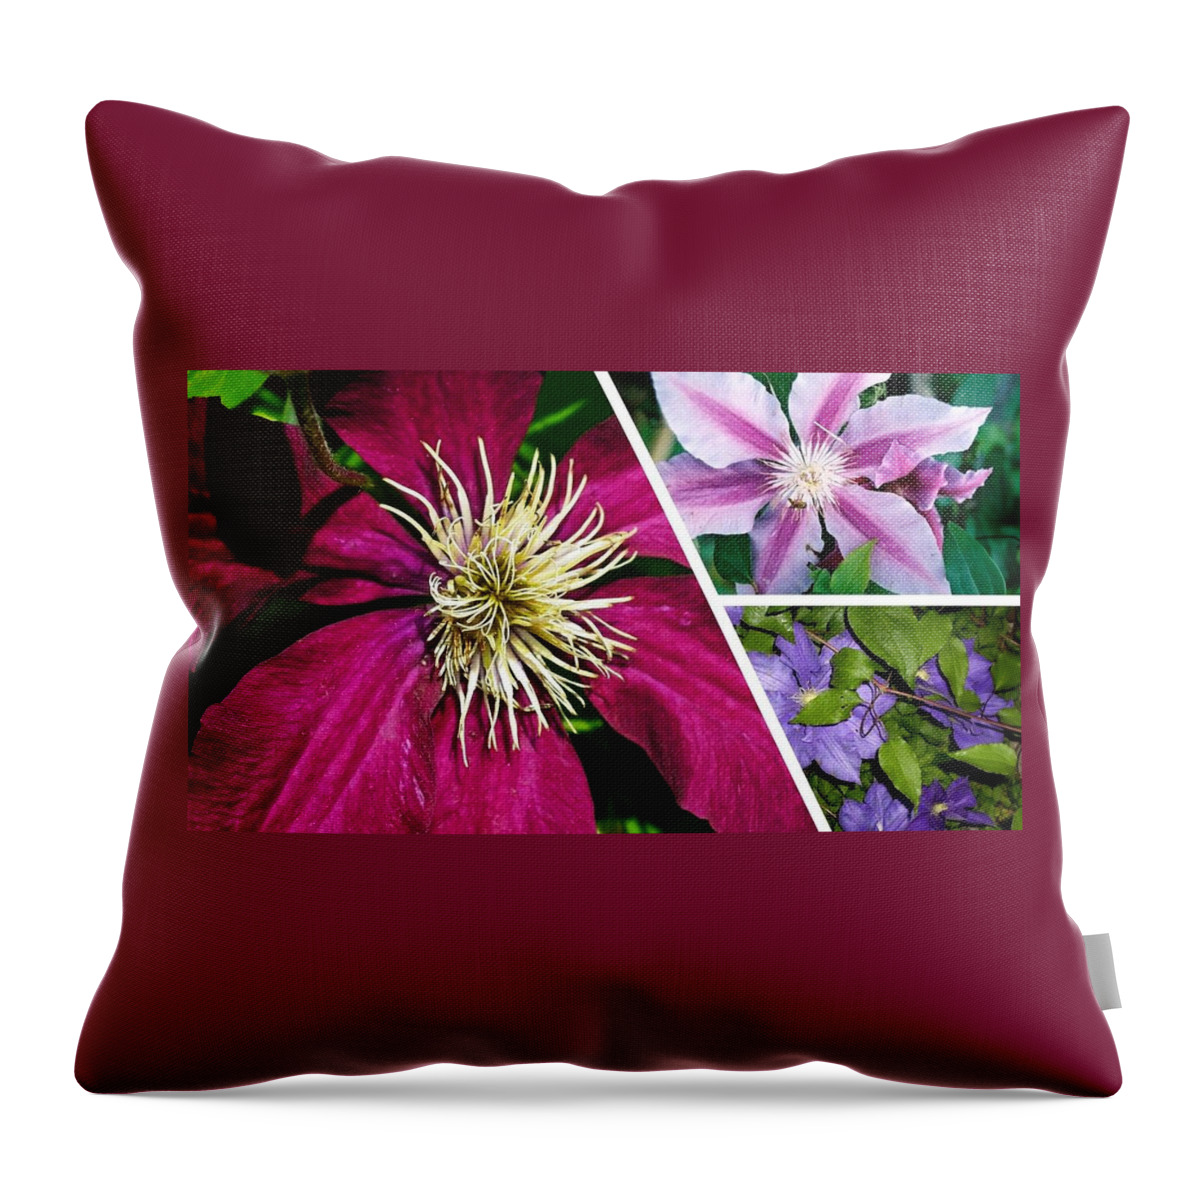 Clematis Throw Pillow featuring the photograph Clematis Blossoms by Nancy Ayanna Wyatt